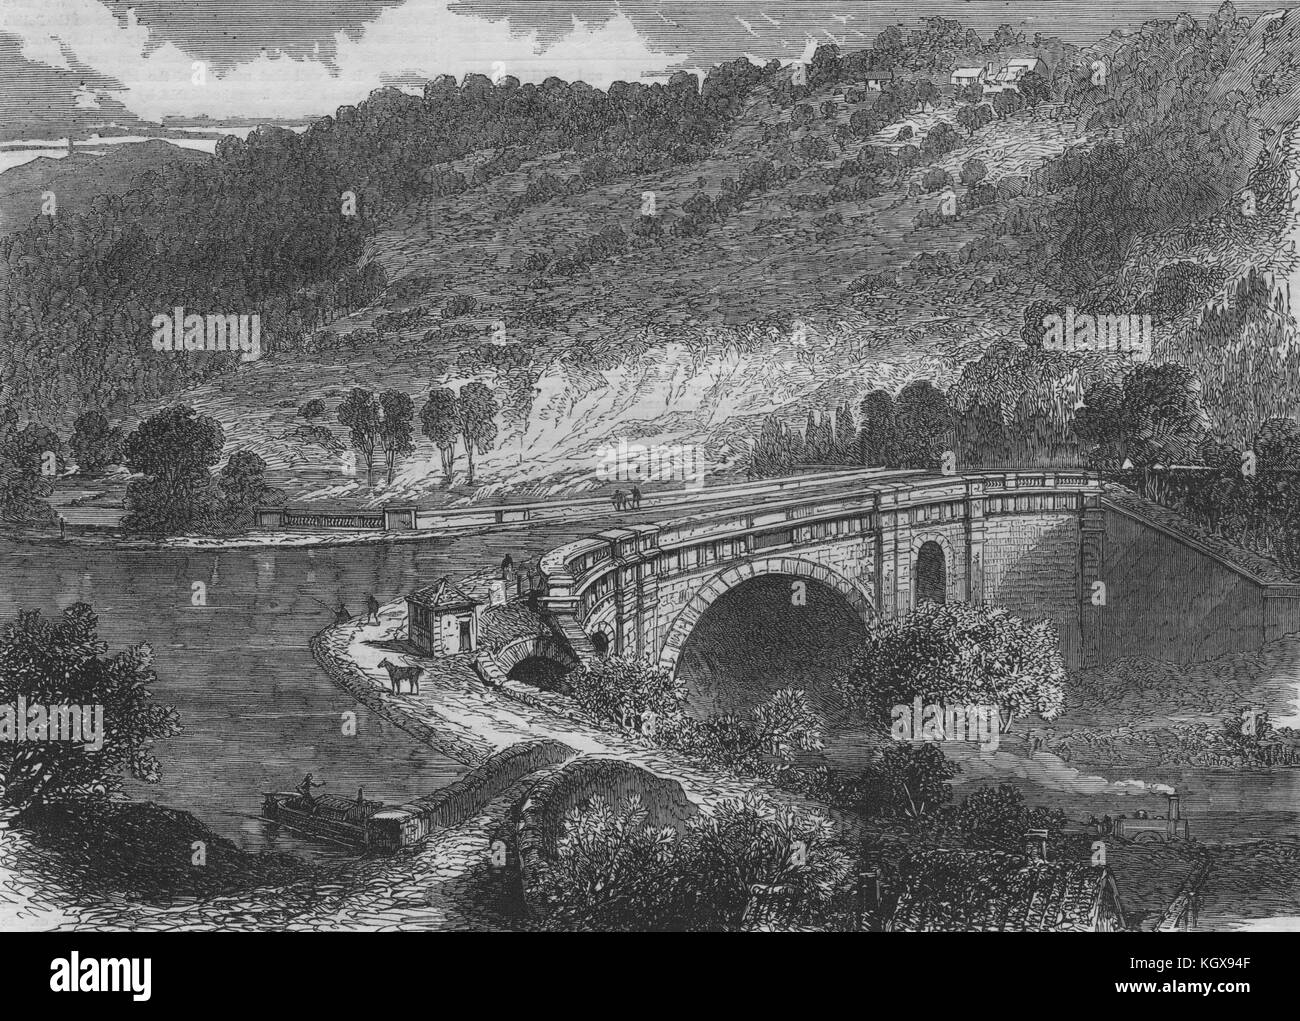 Aqueduct of the Kennet & Avon canal, at Limpley Stoke, nr Bath. Wiltshire 1864. The Illustrated London News Stock Photo